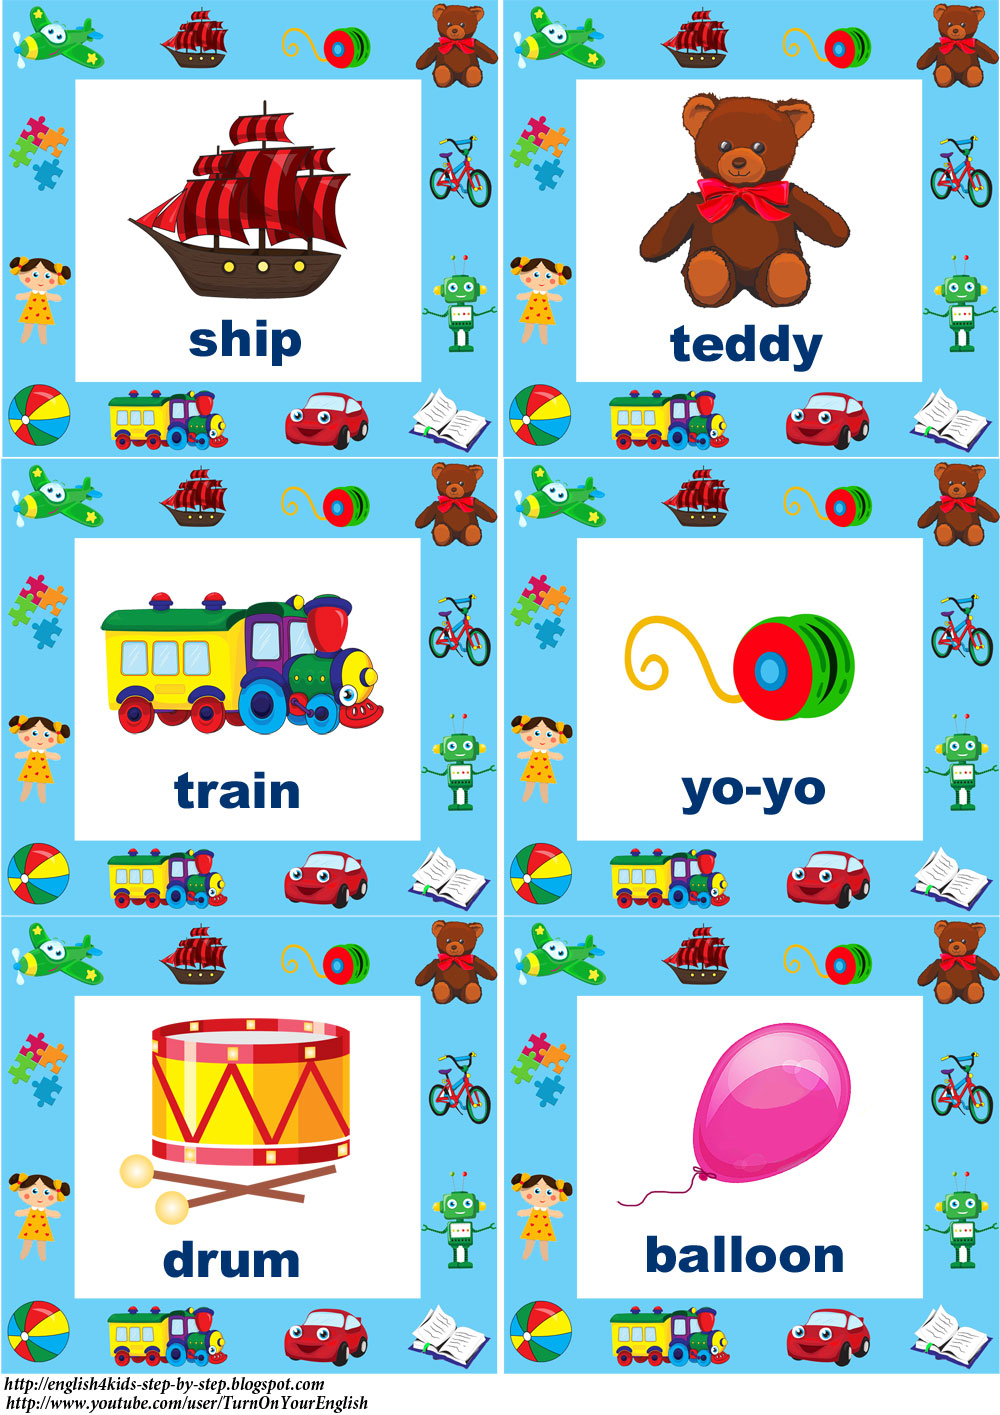 english-for-kids-step-by-step-toys-song-for-children